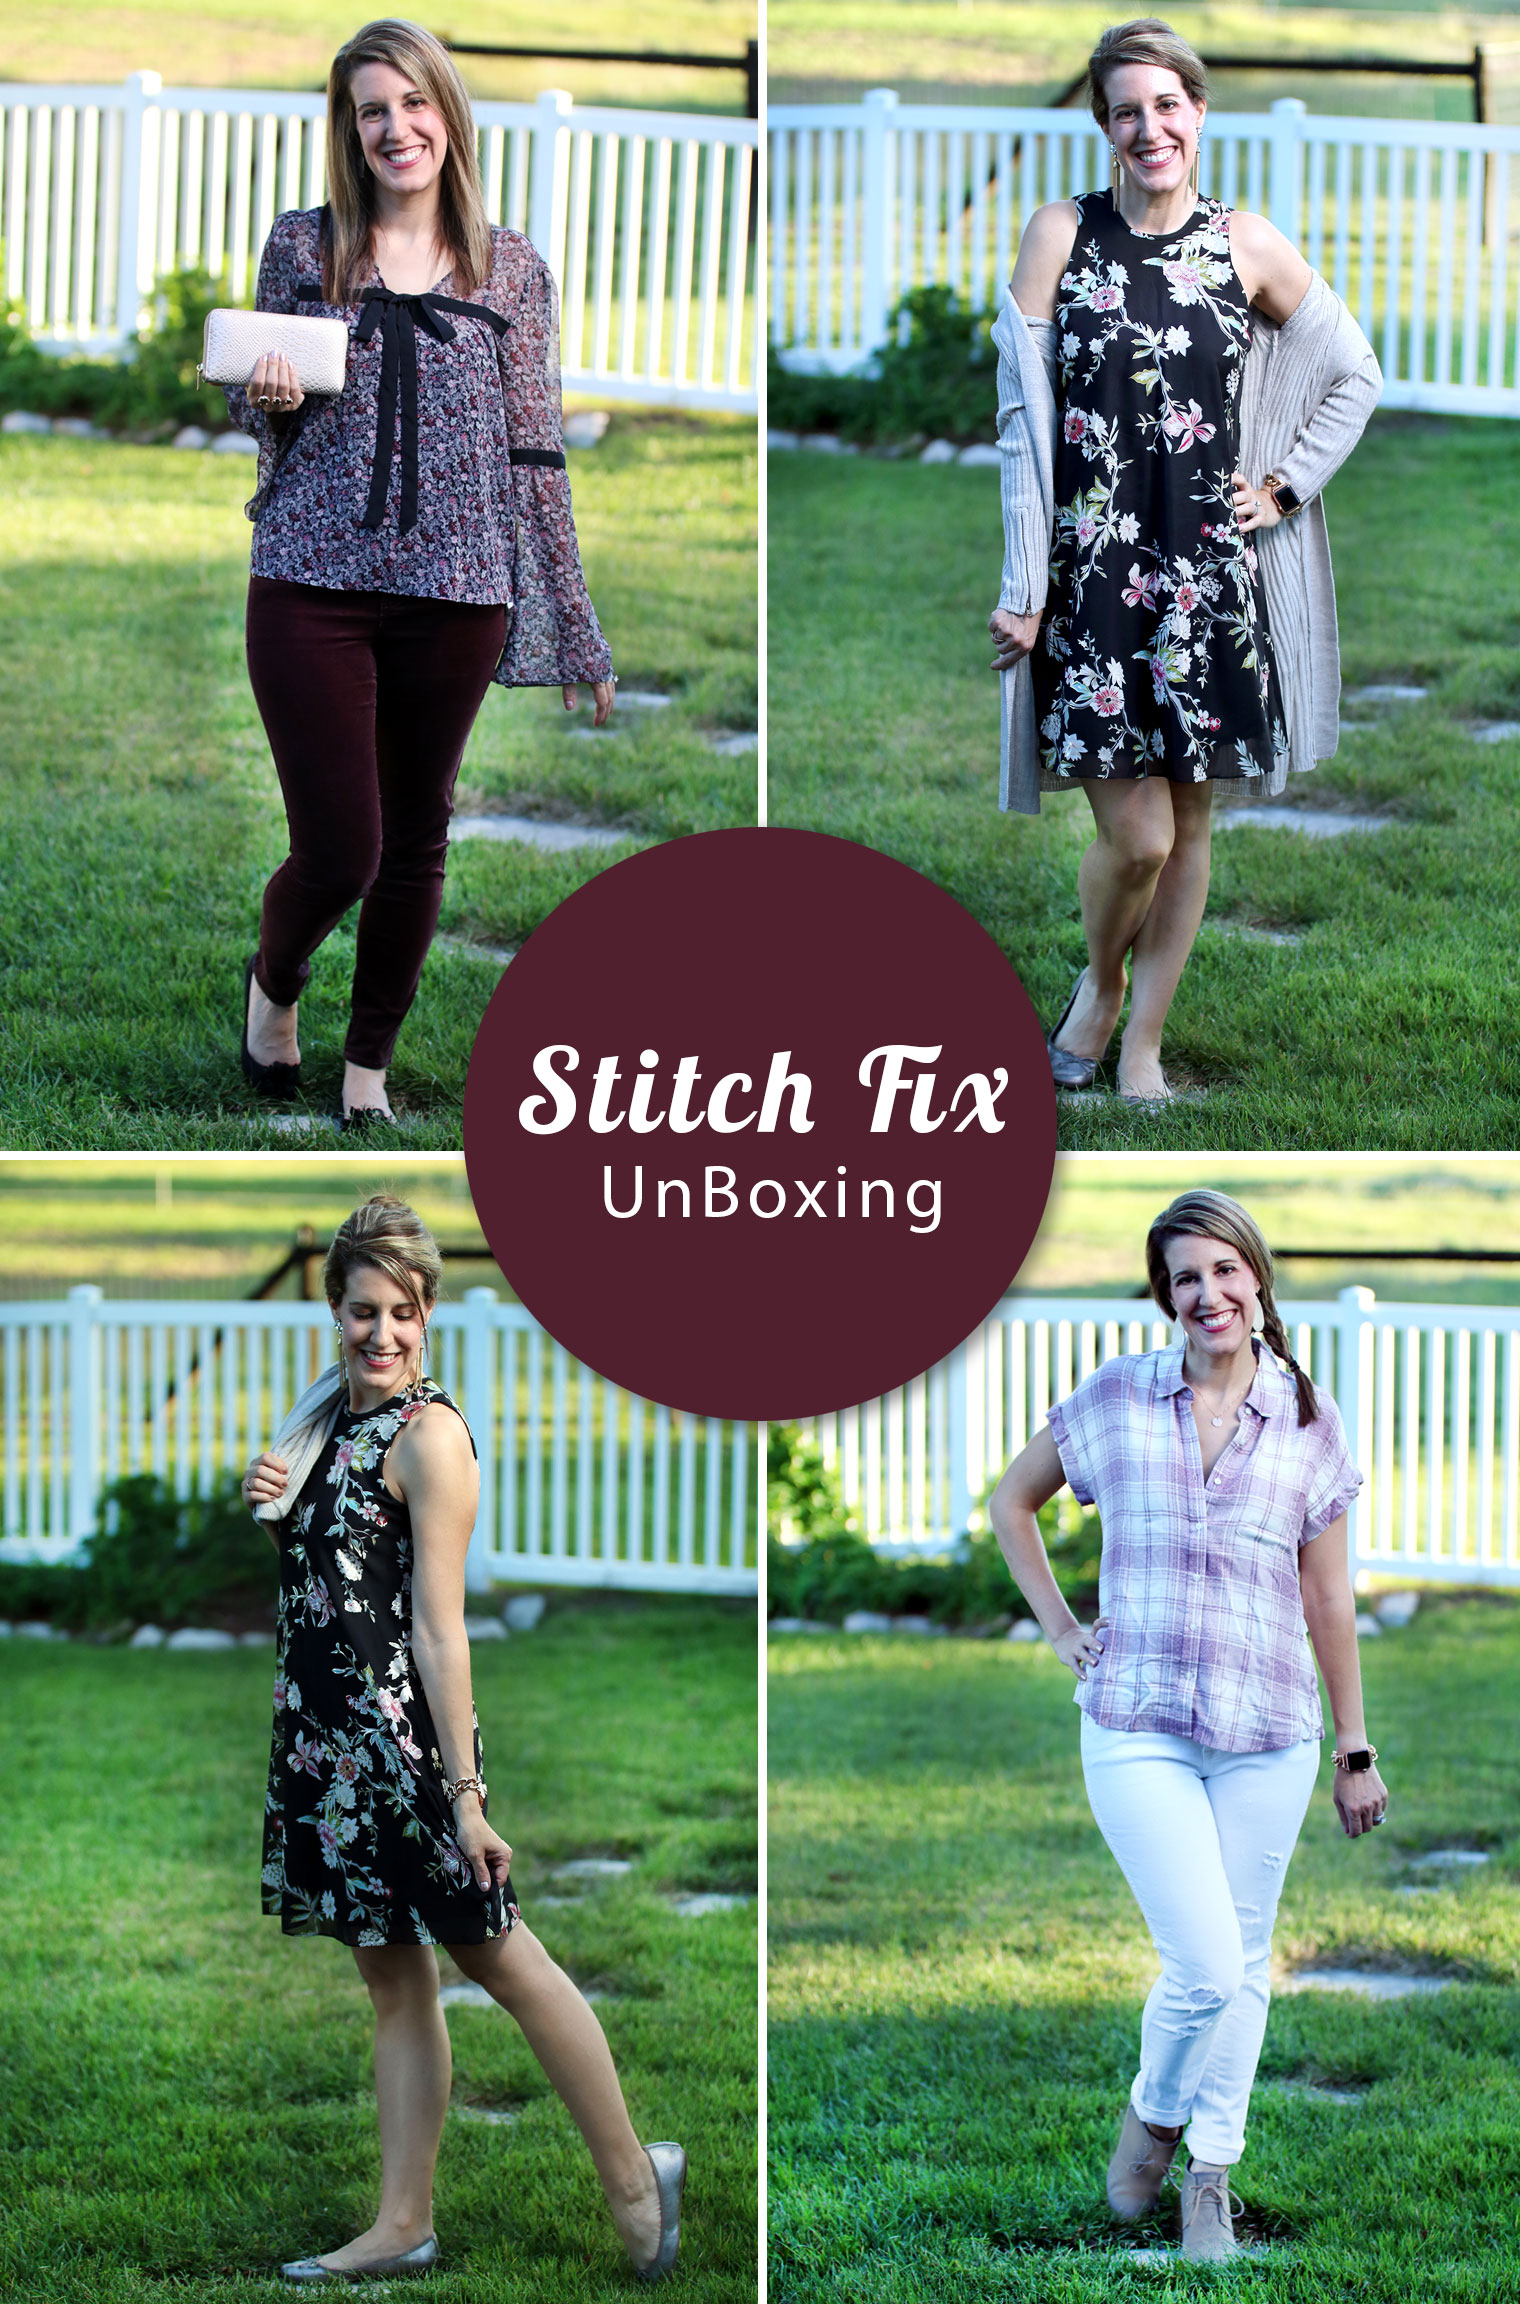 2017 FASHION TRENDS! Ask your STITCH FIX stylist for items like